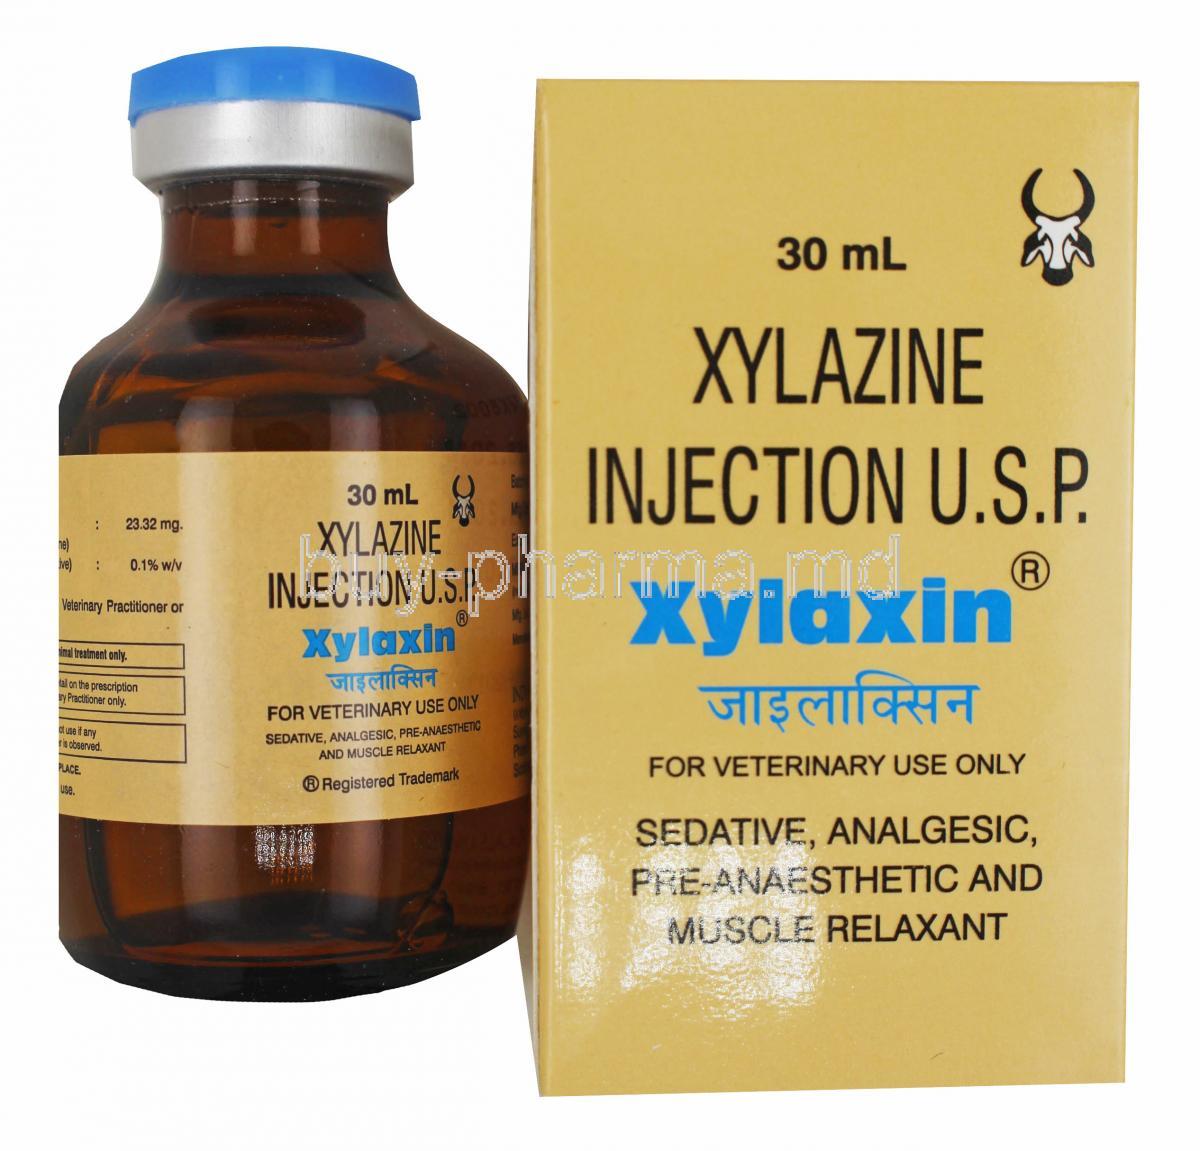 Xylaxin Injection, Xylazine box and vial